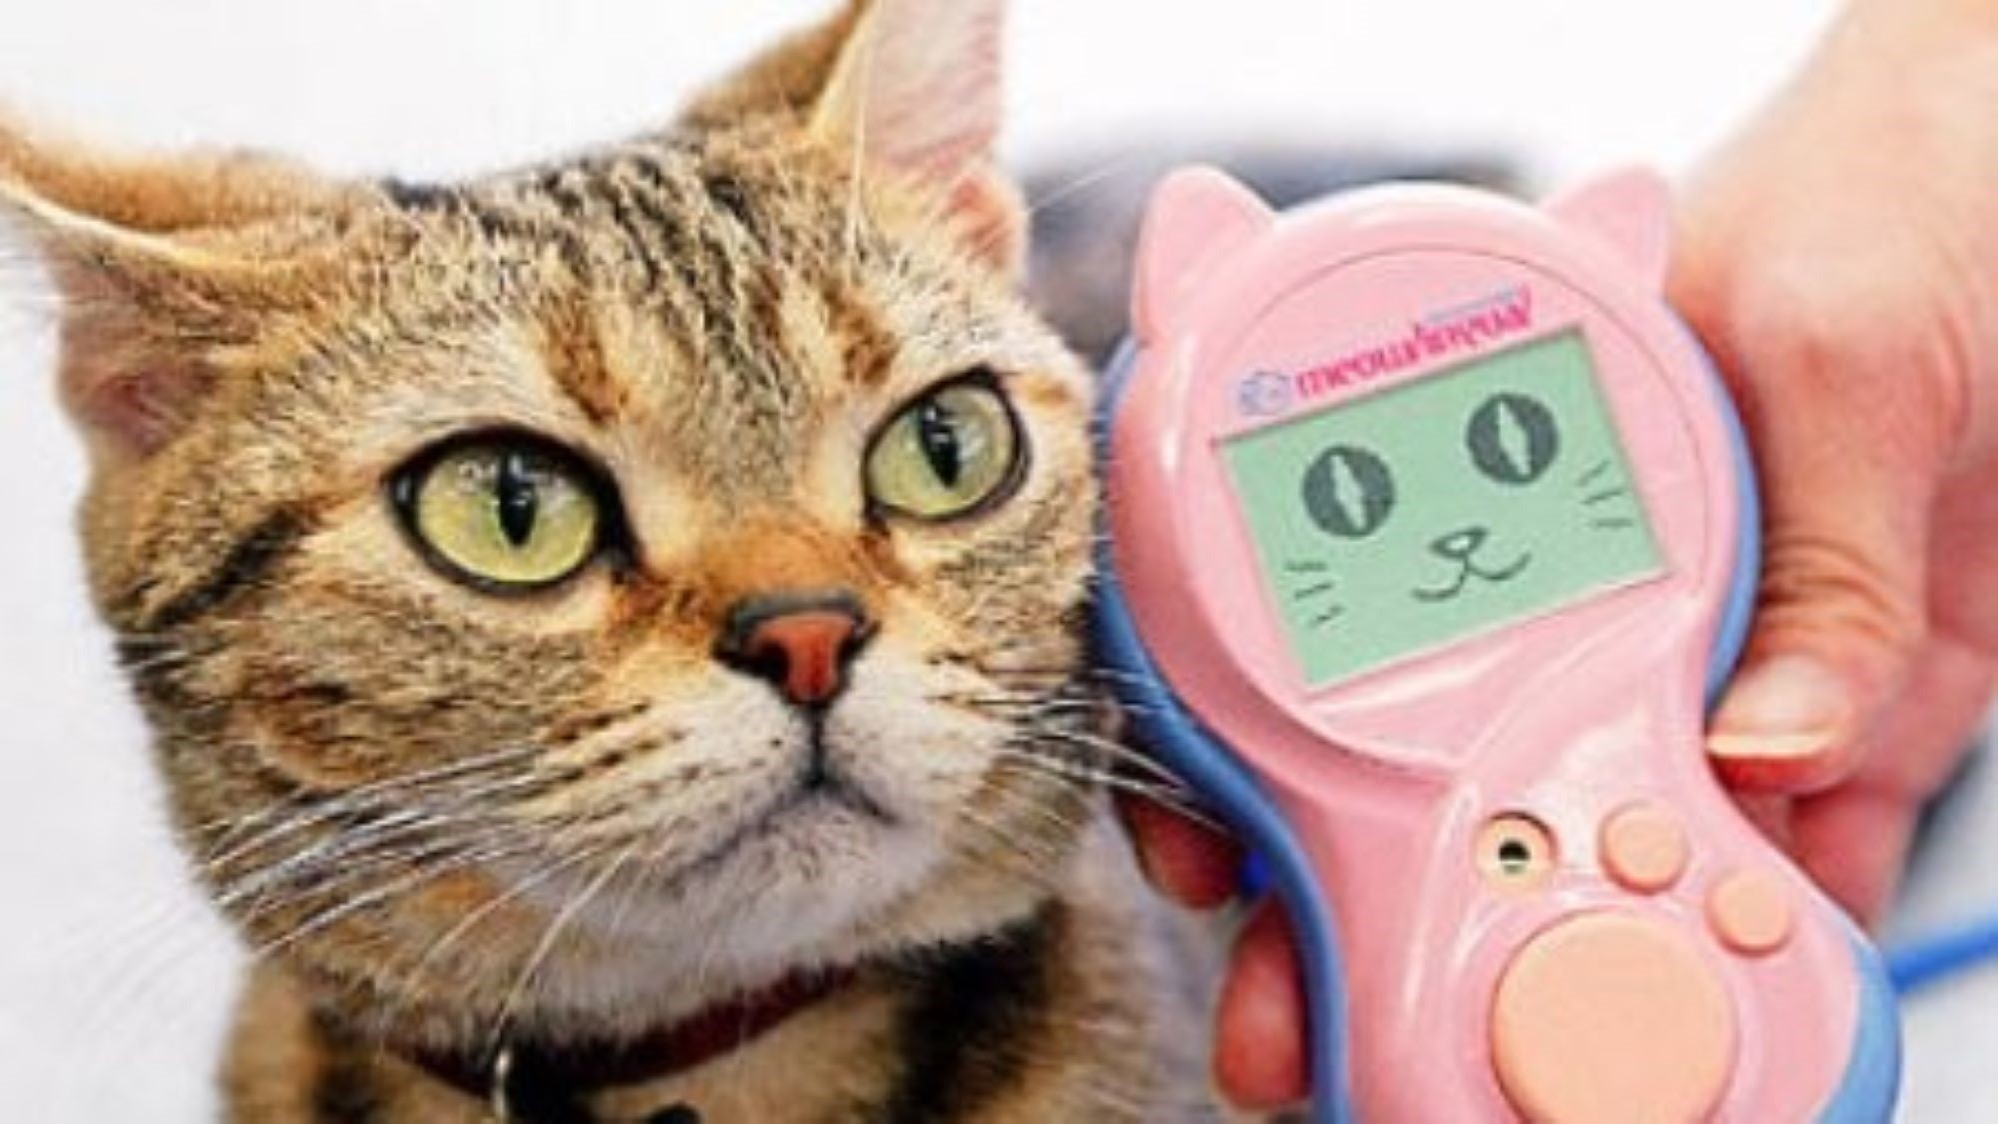 A cat and the Meowlingual translating device.